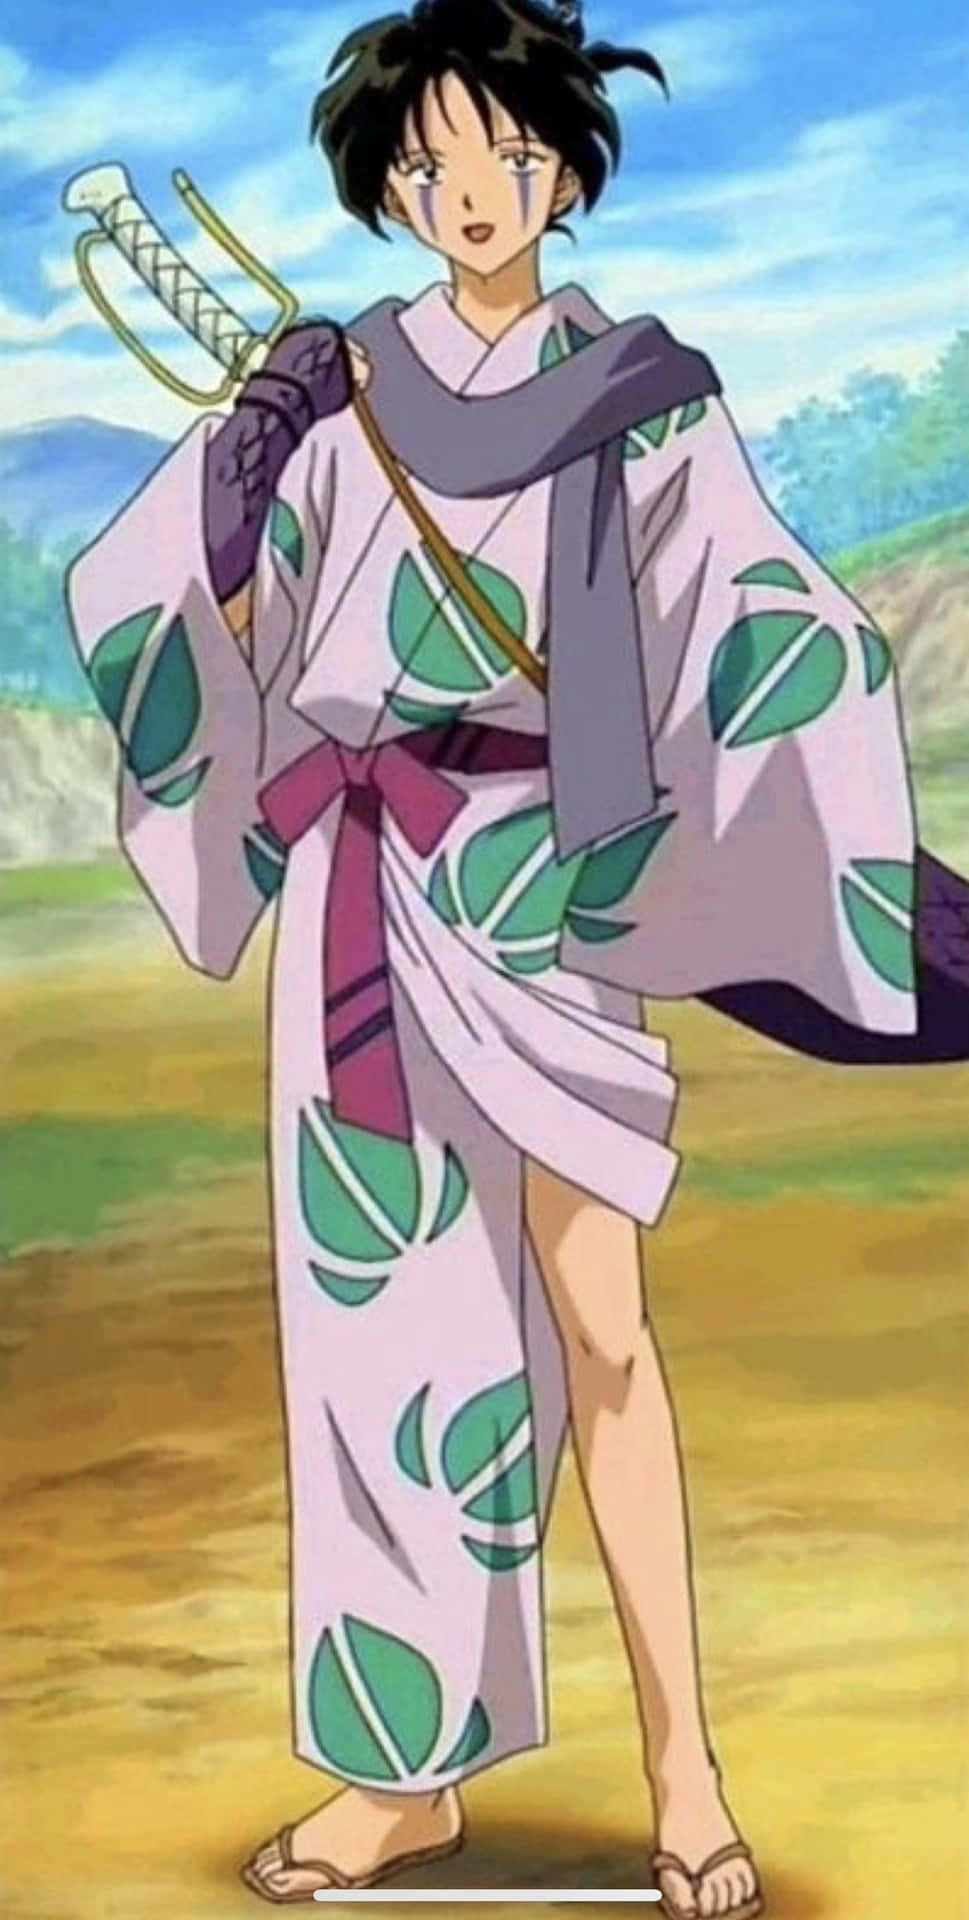 A fearless look: Jakotsu from the Anime Inuyasha Wallpaper